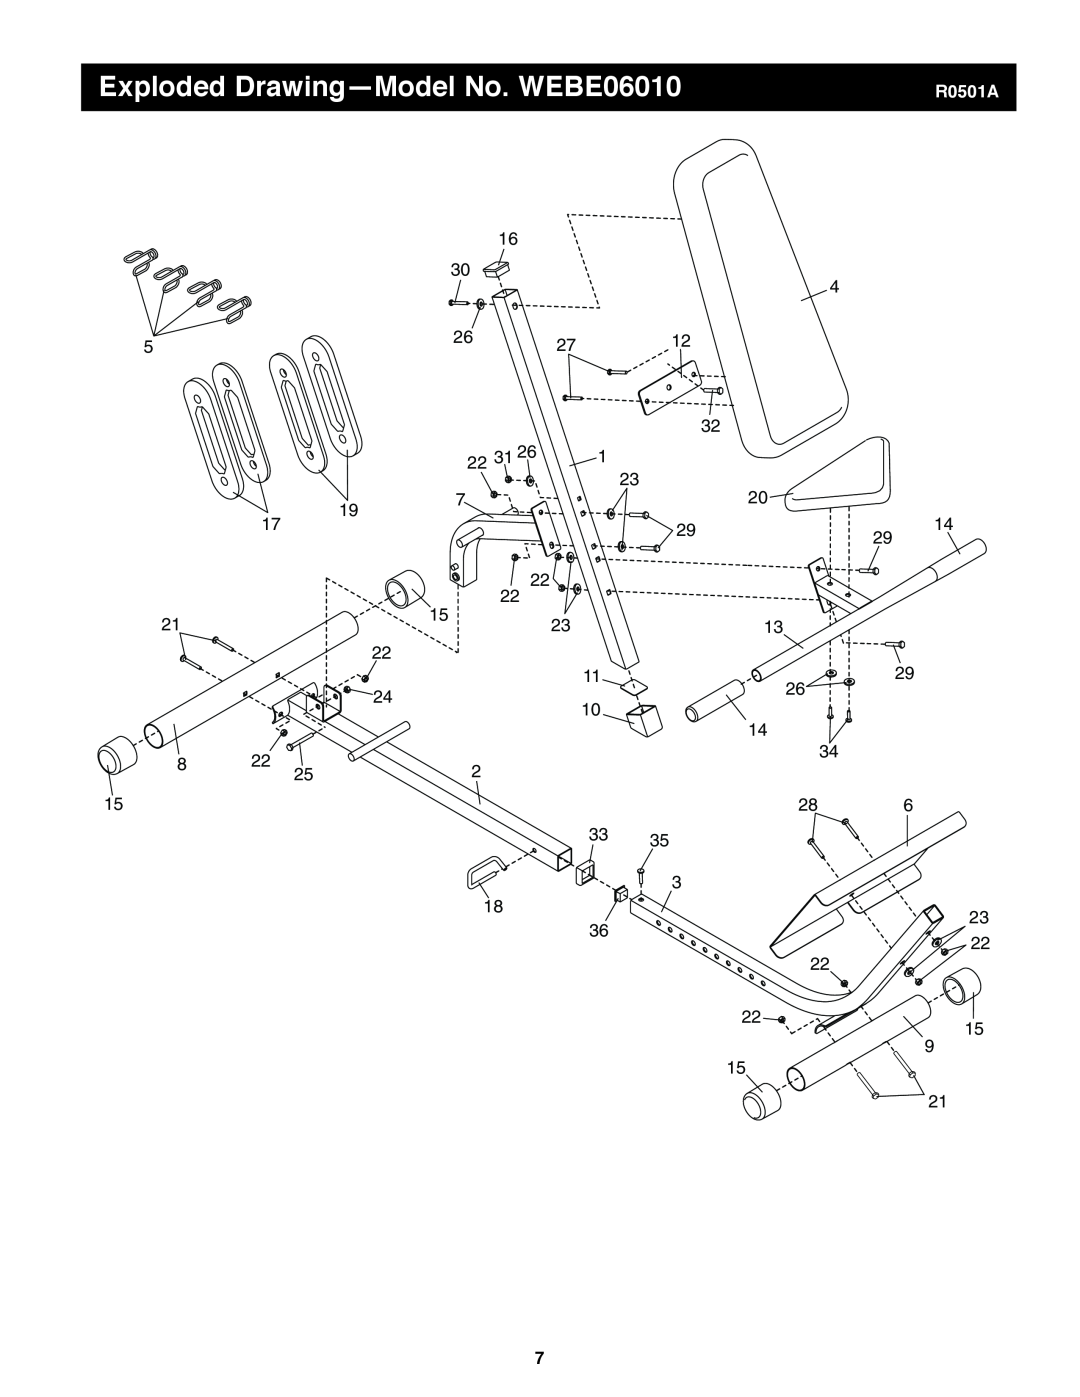 Weider user manual Exploded Drawing-Model No. WEBE06010, R0501A 